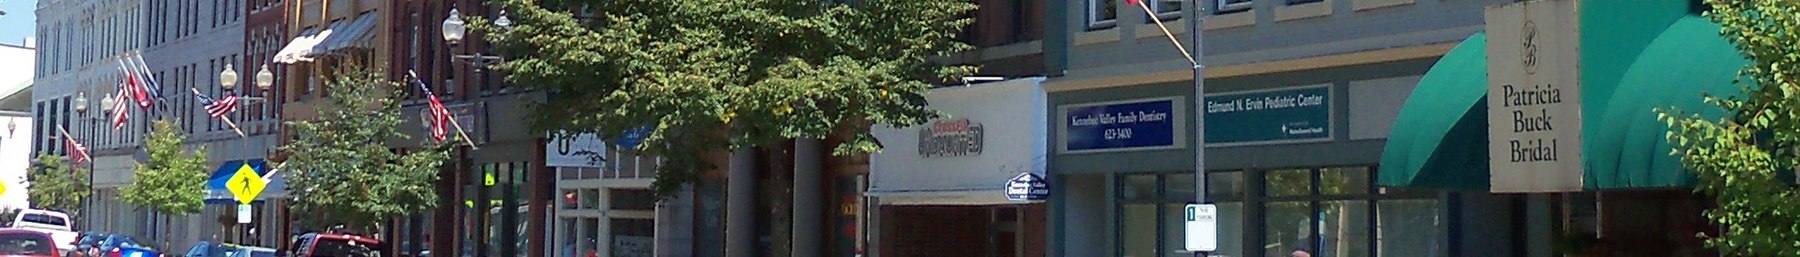 Downtown Augusta 6 (cropped).JPG